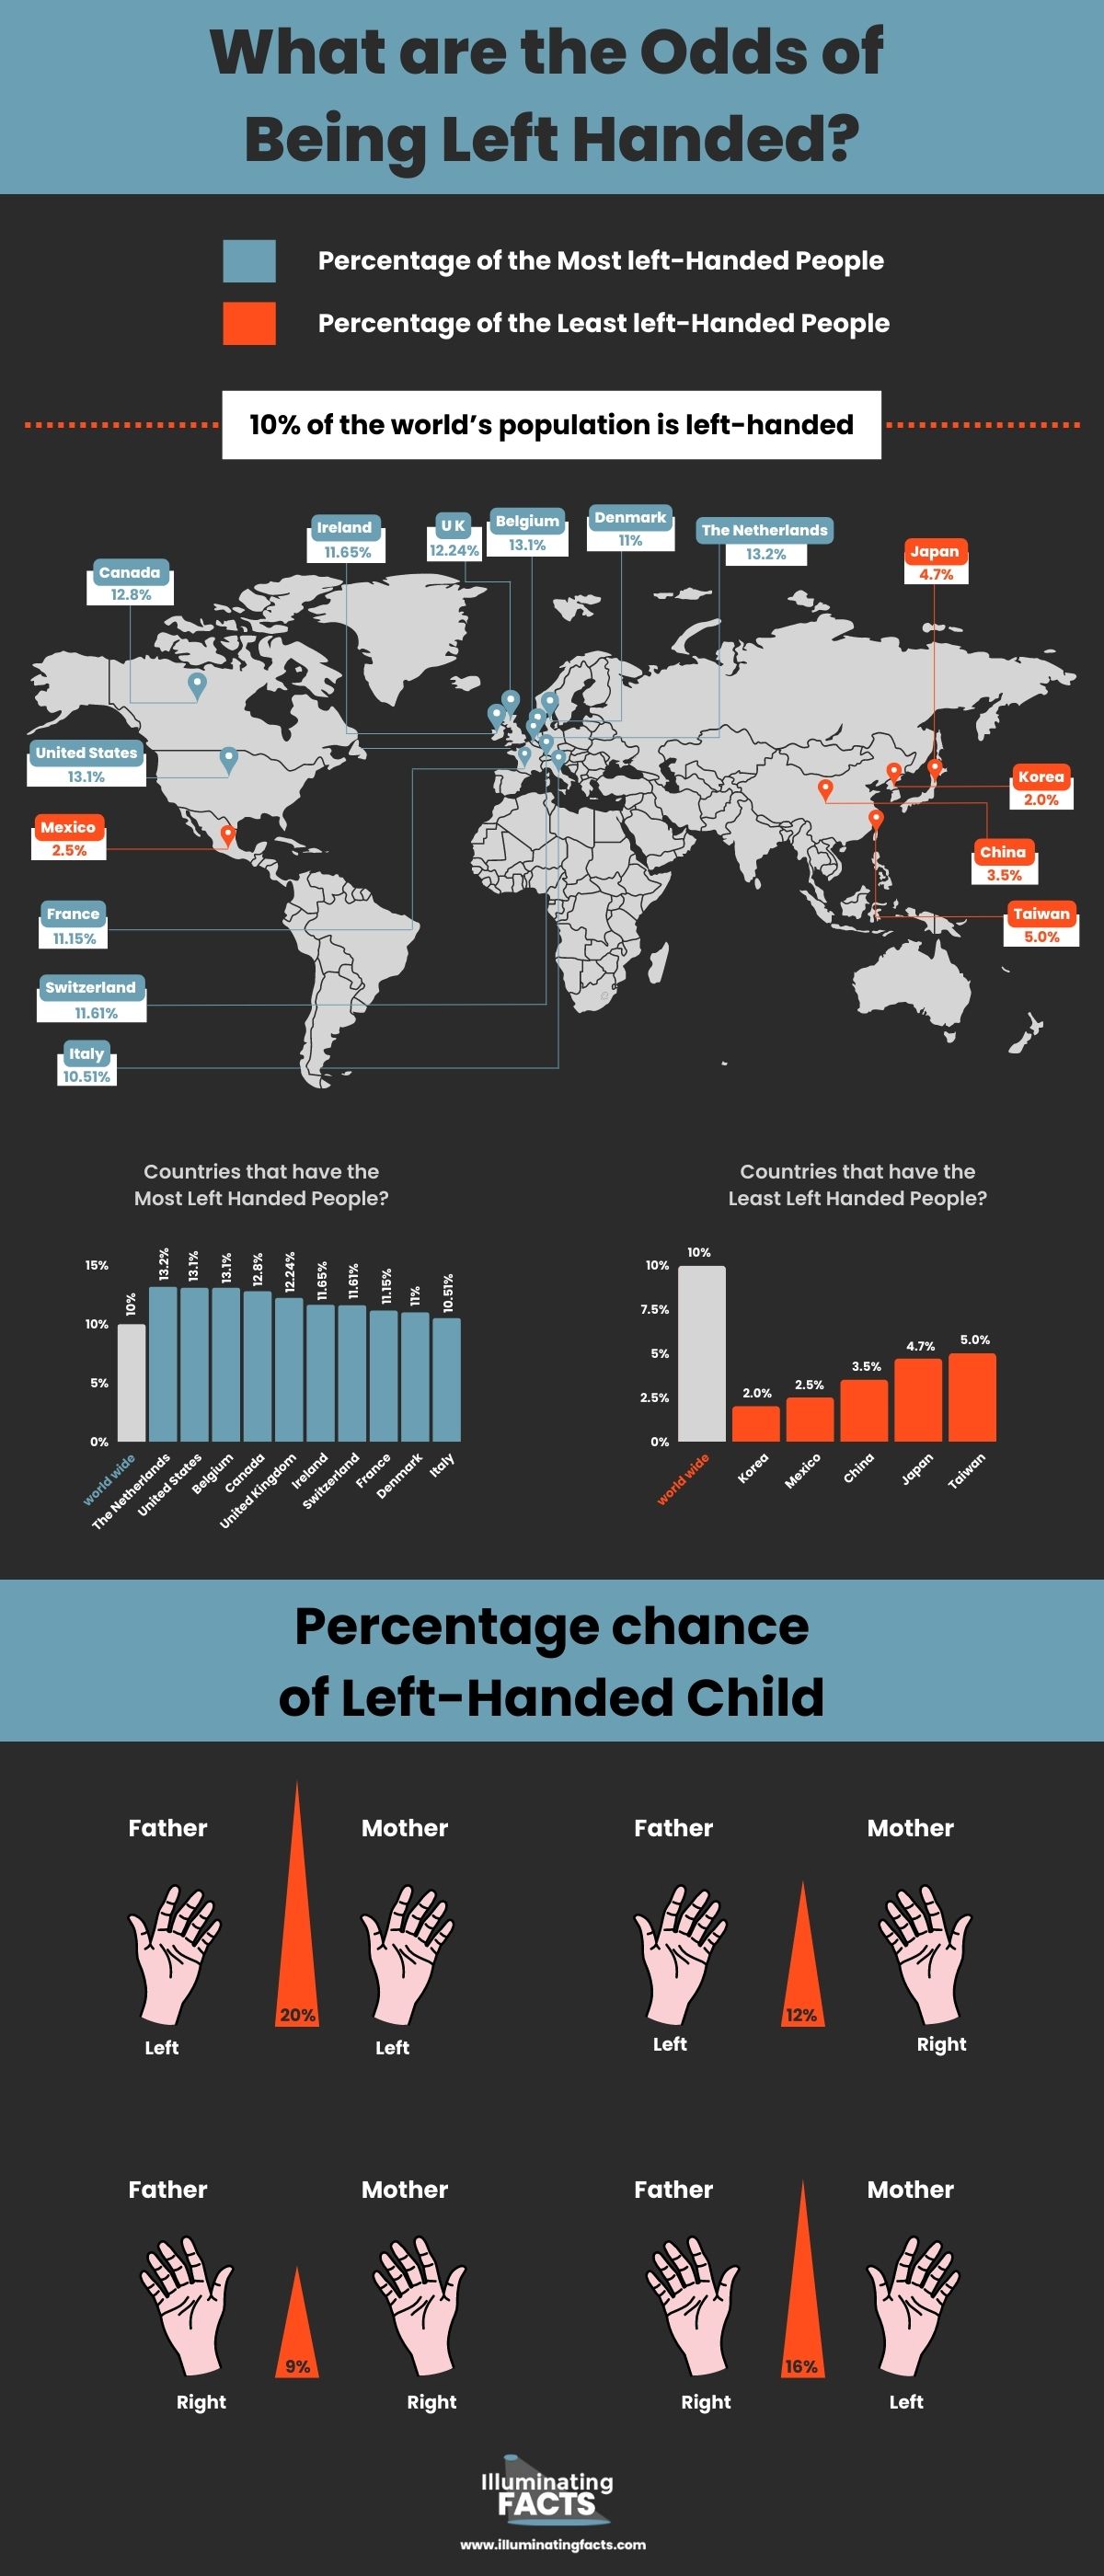 What are the Odds of Being Left Handed